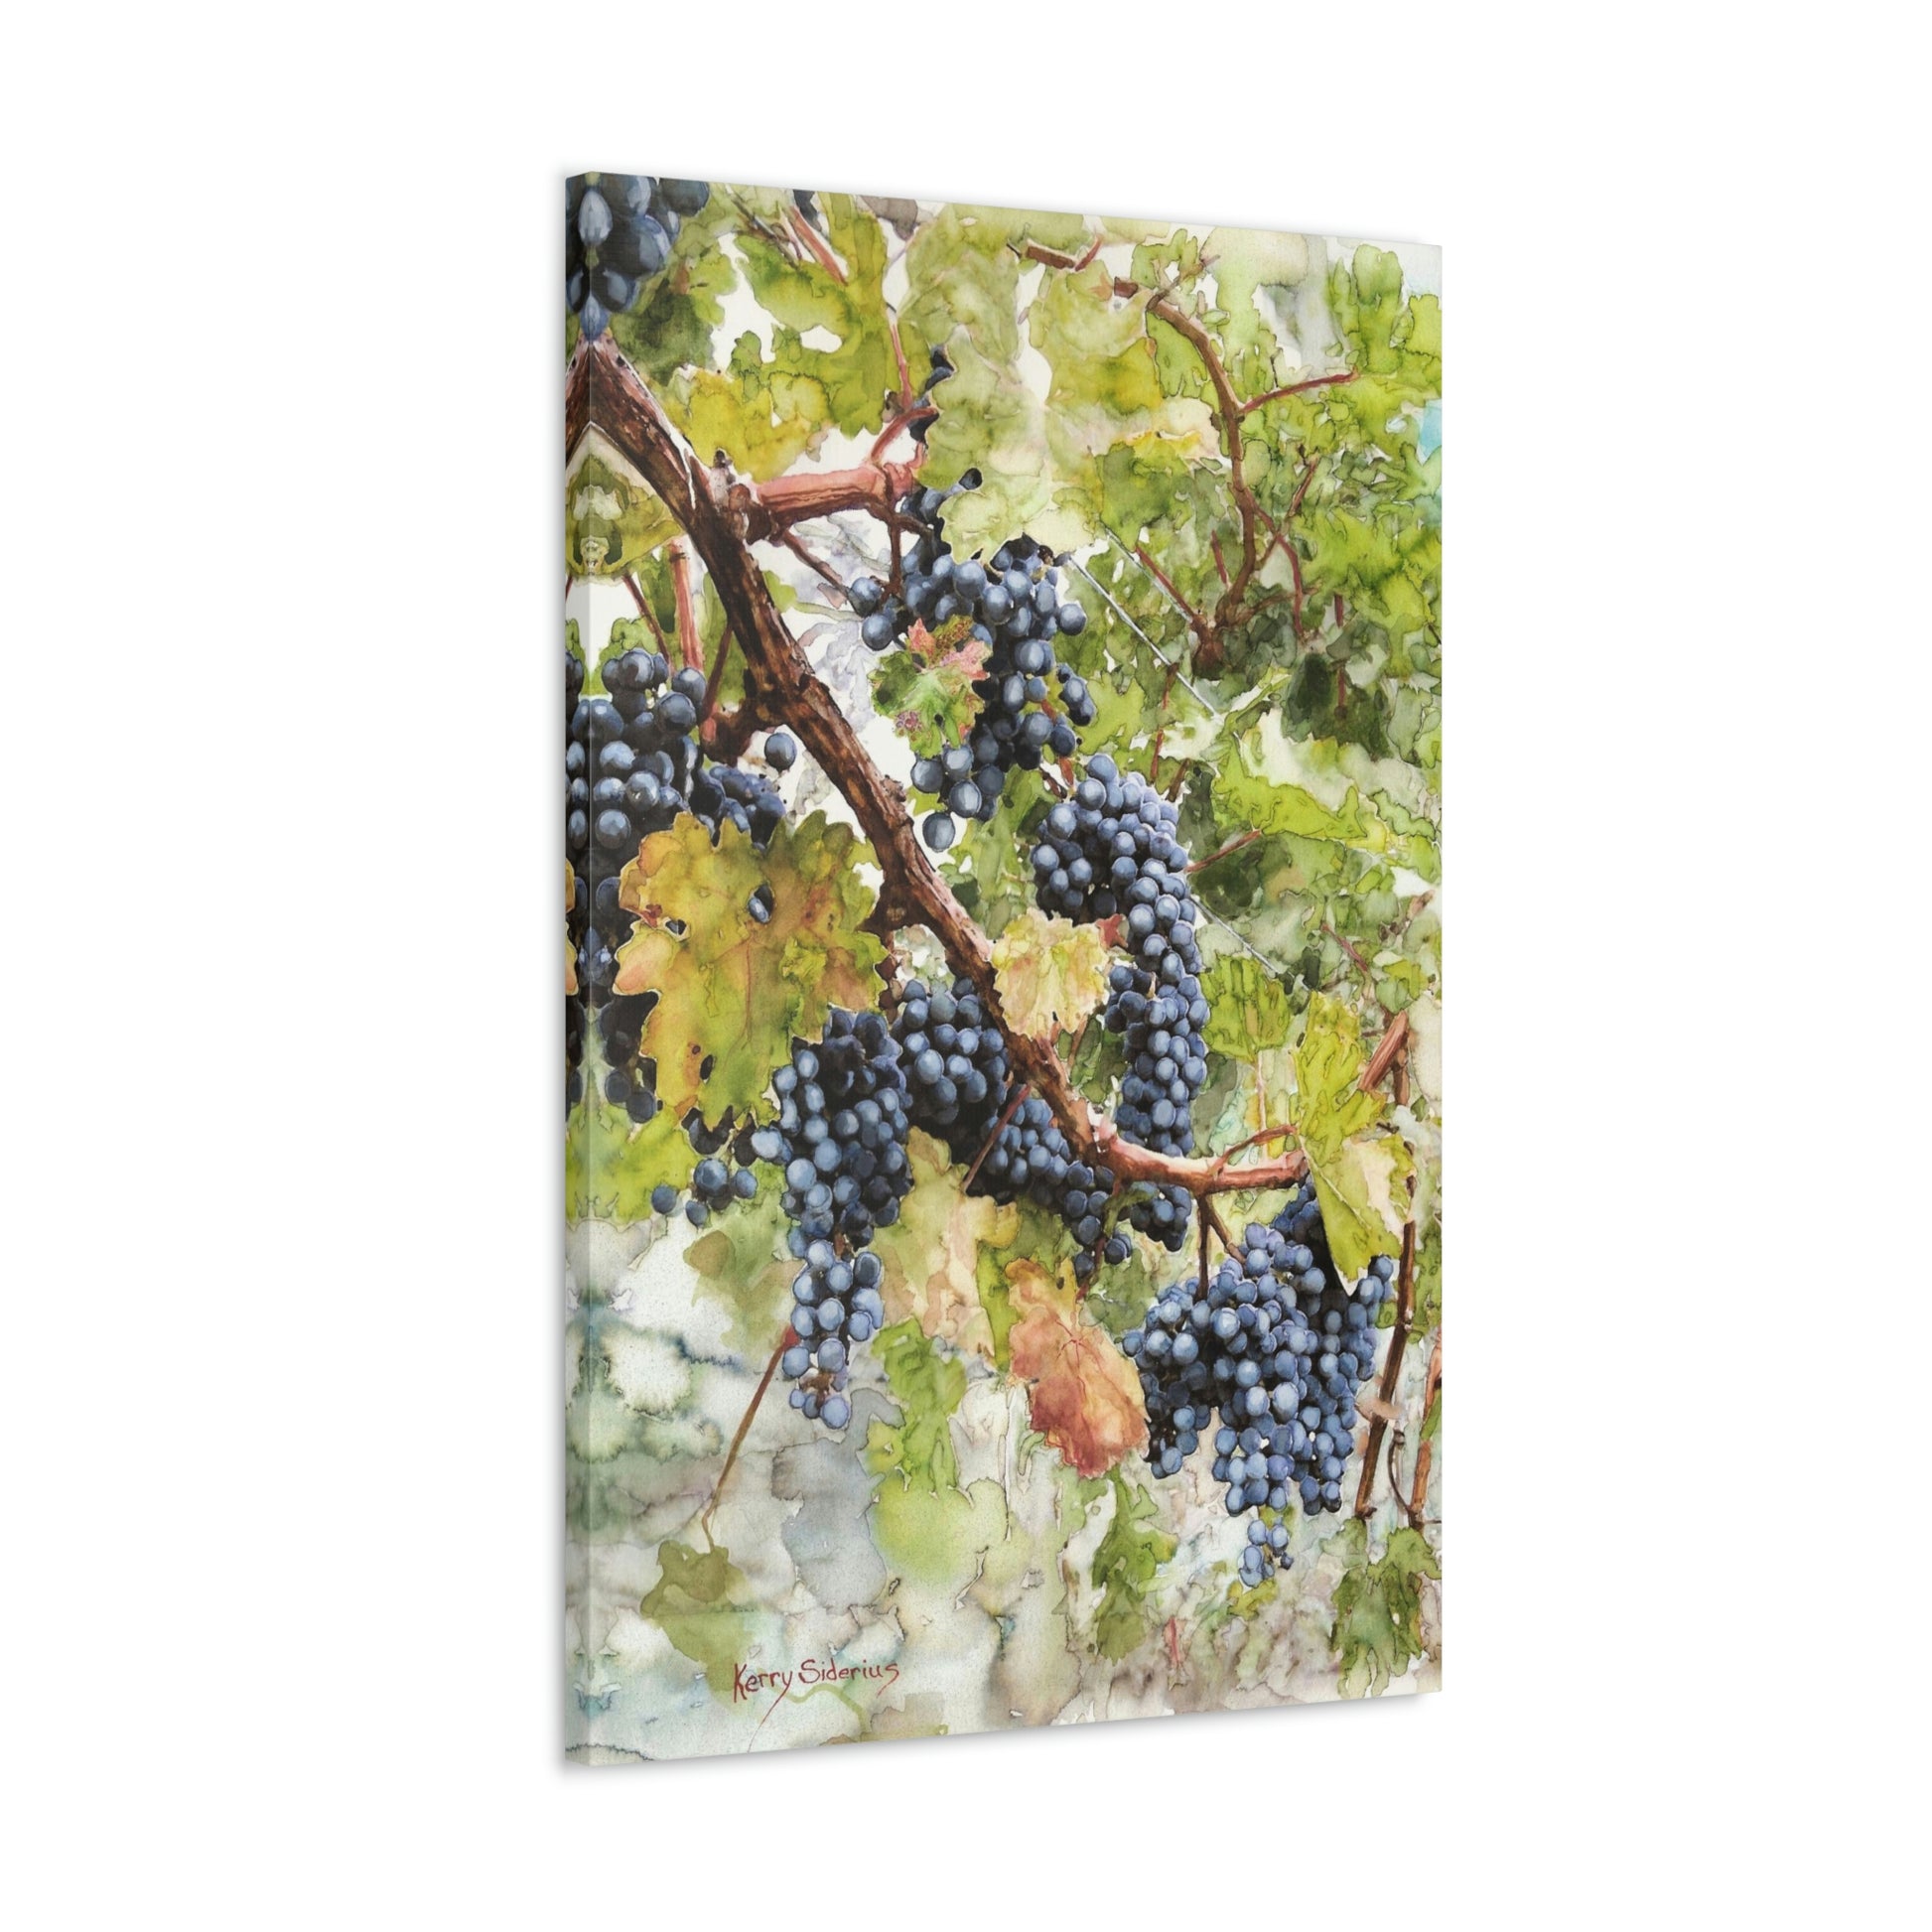 "Walking Through The Vines" Gallery Wrapped Canvas - Kerry Siderius Art 